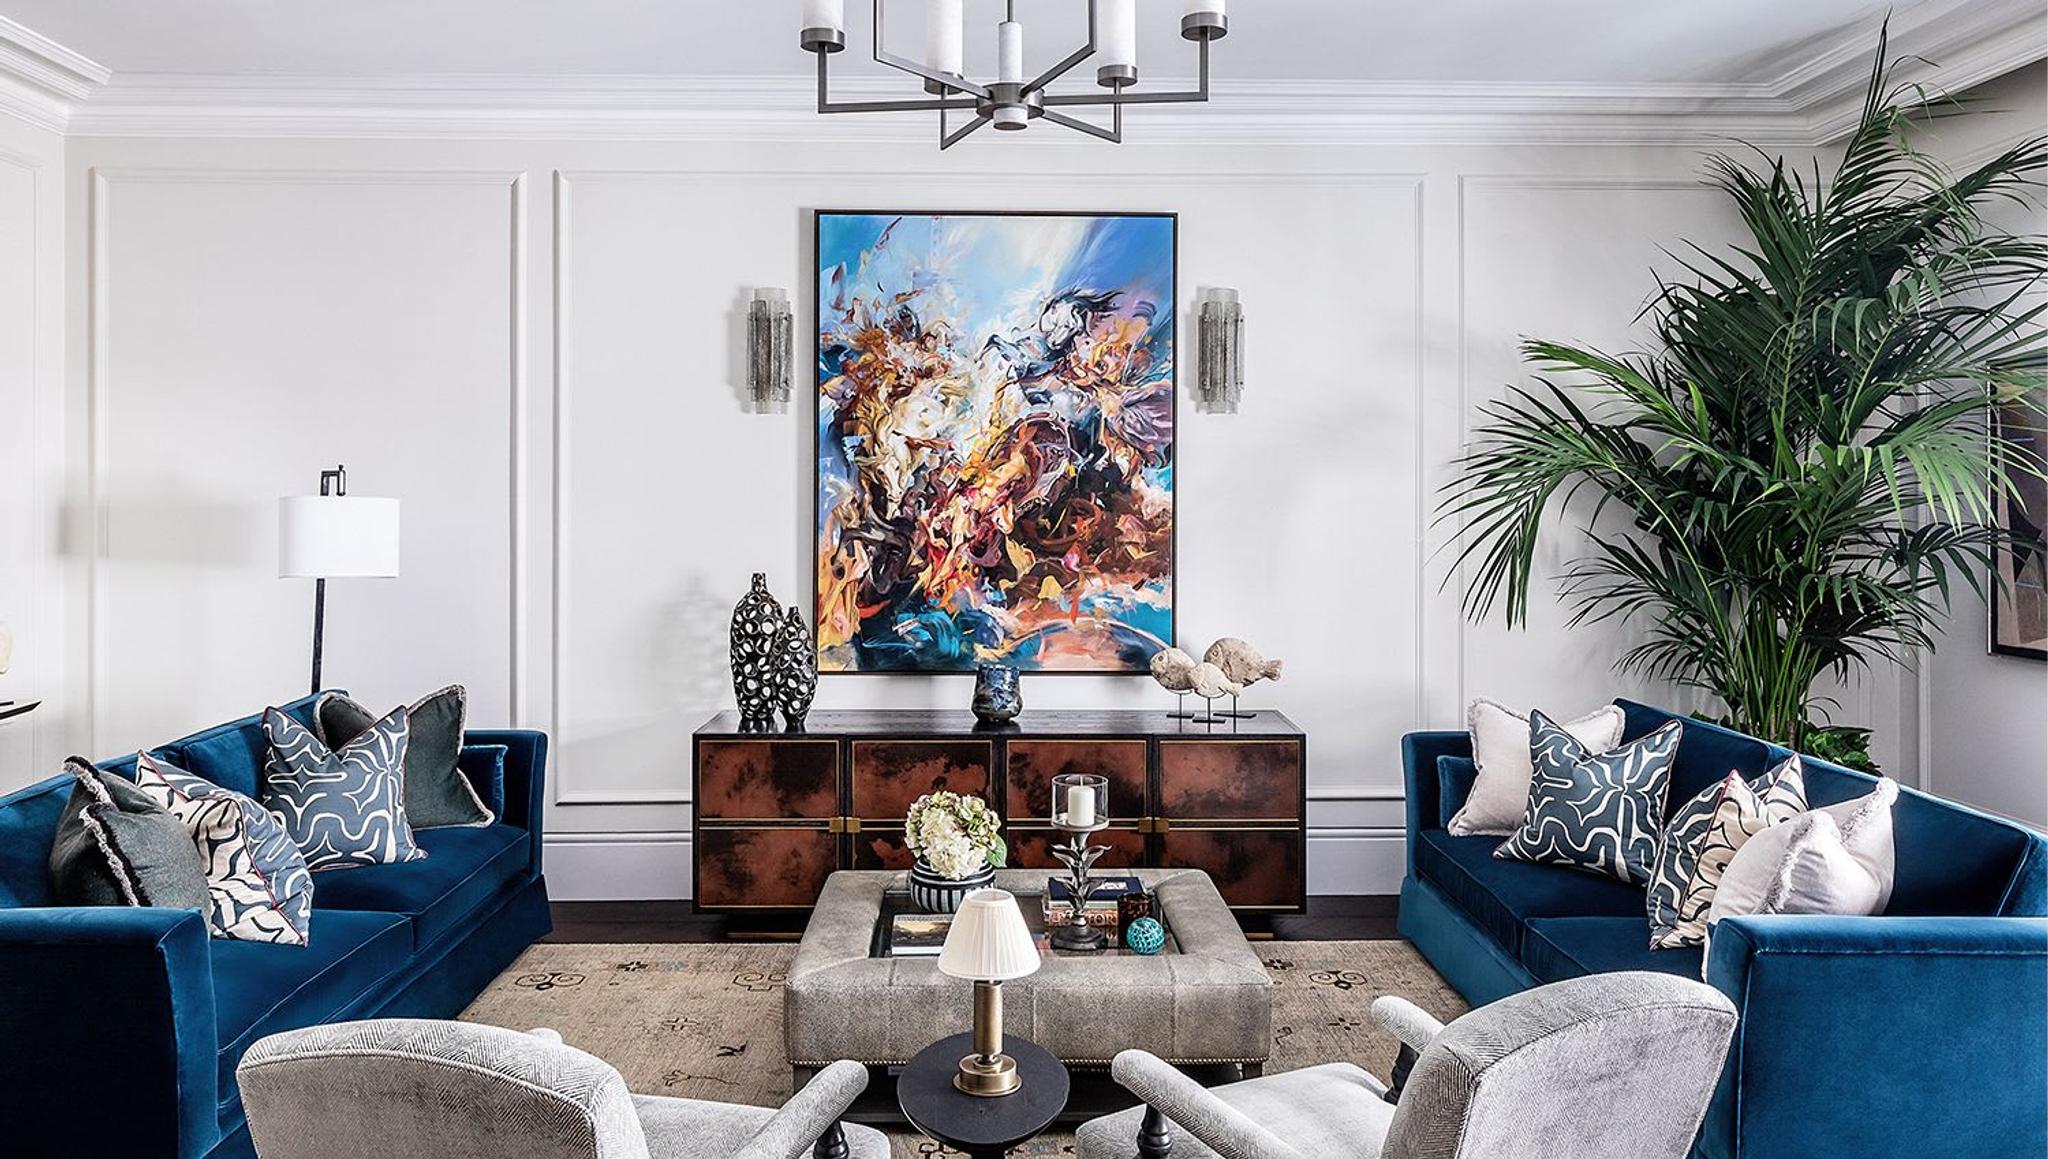 The OWO Residences, Living Room: bespoke features abound, from the plush velvet sofas to the specially commissioned art